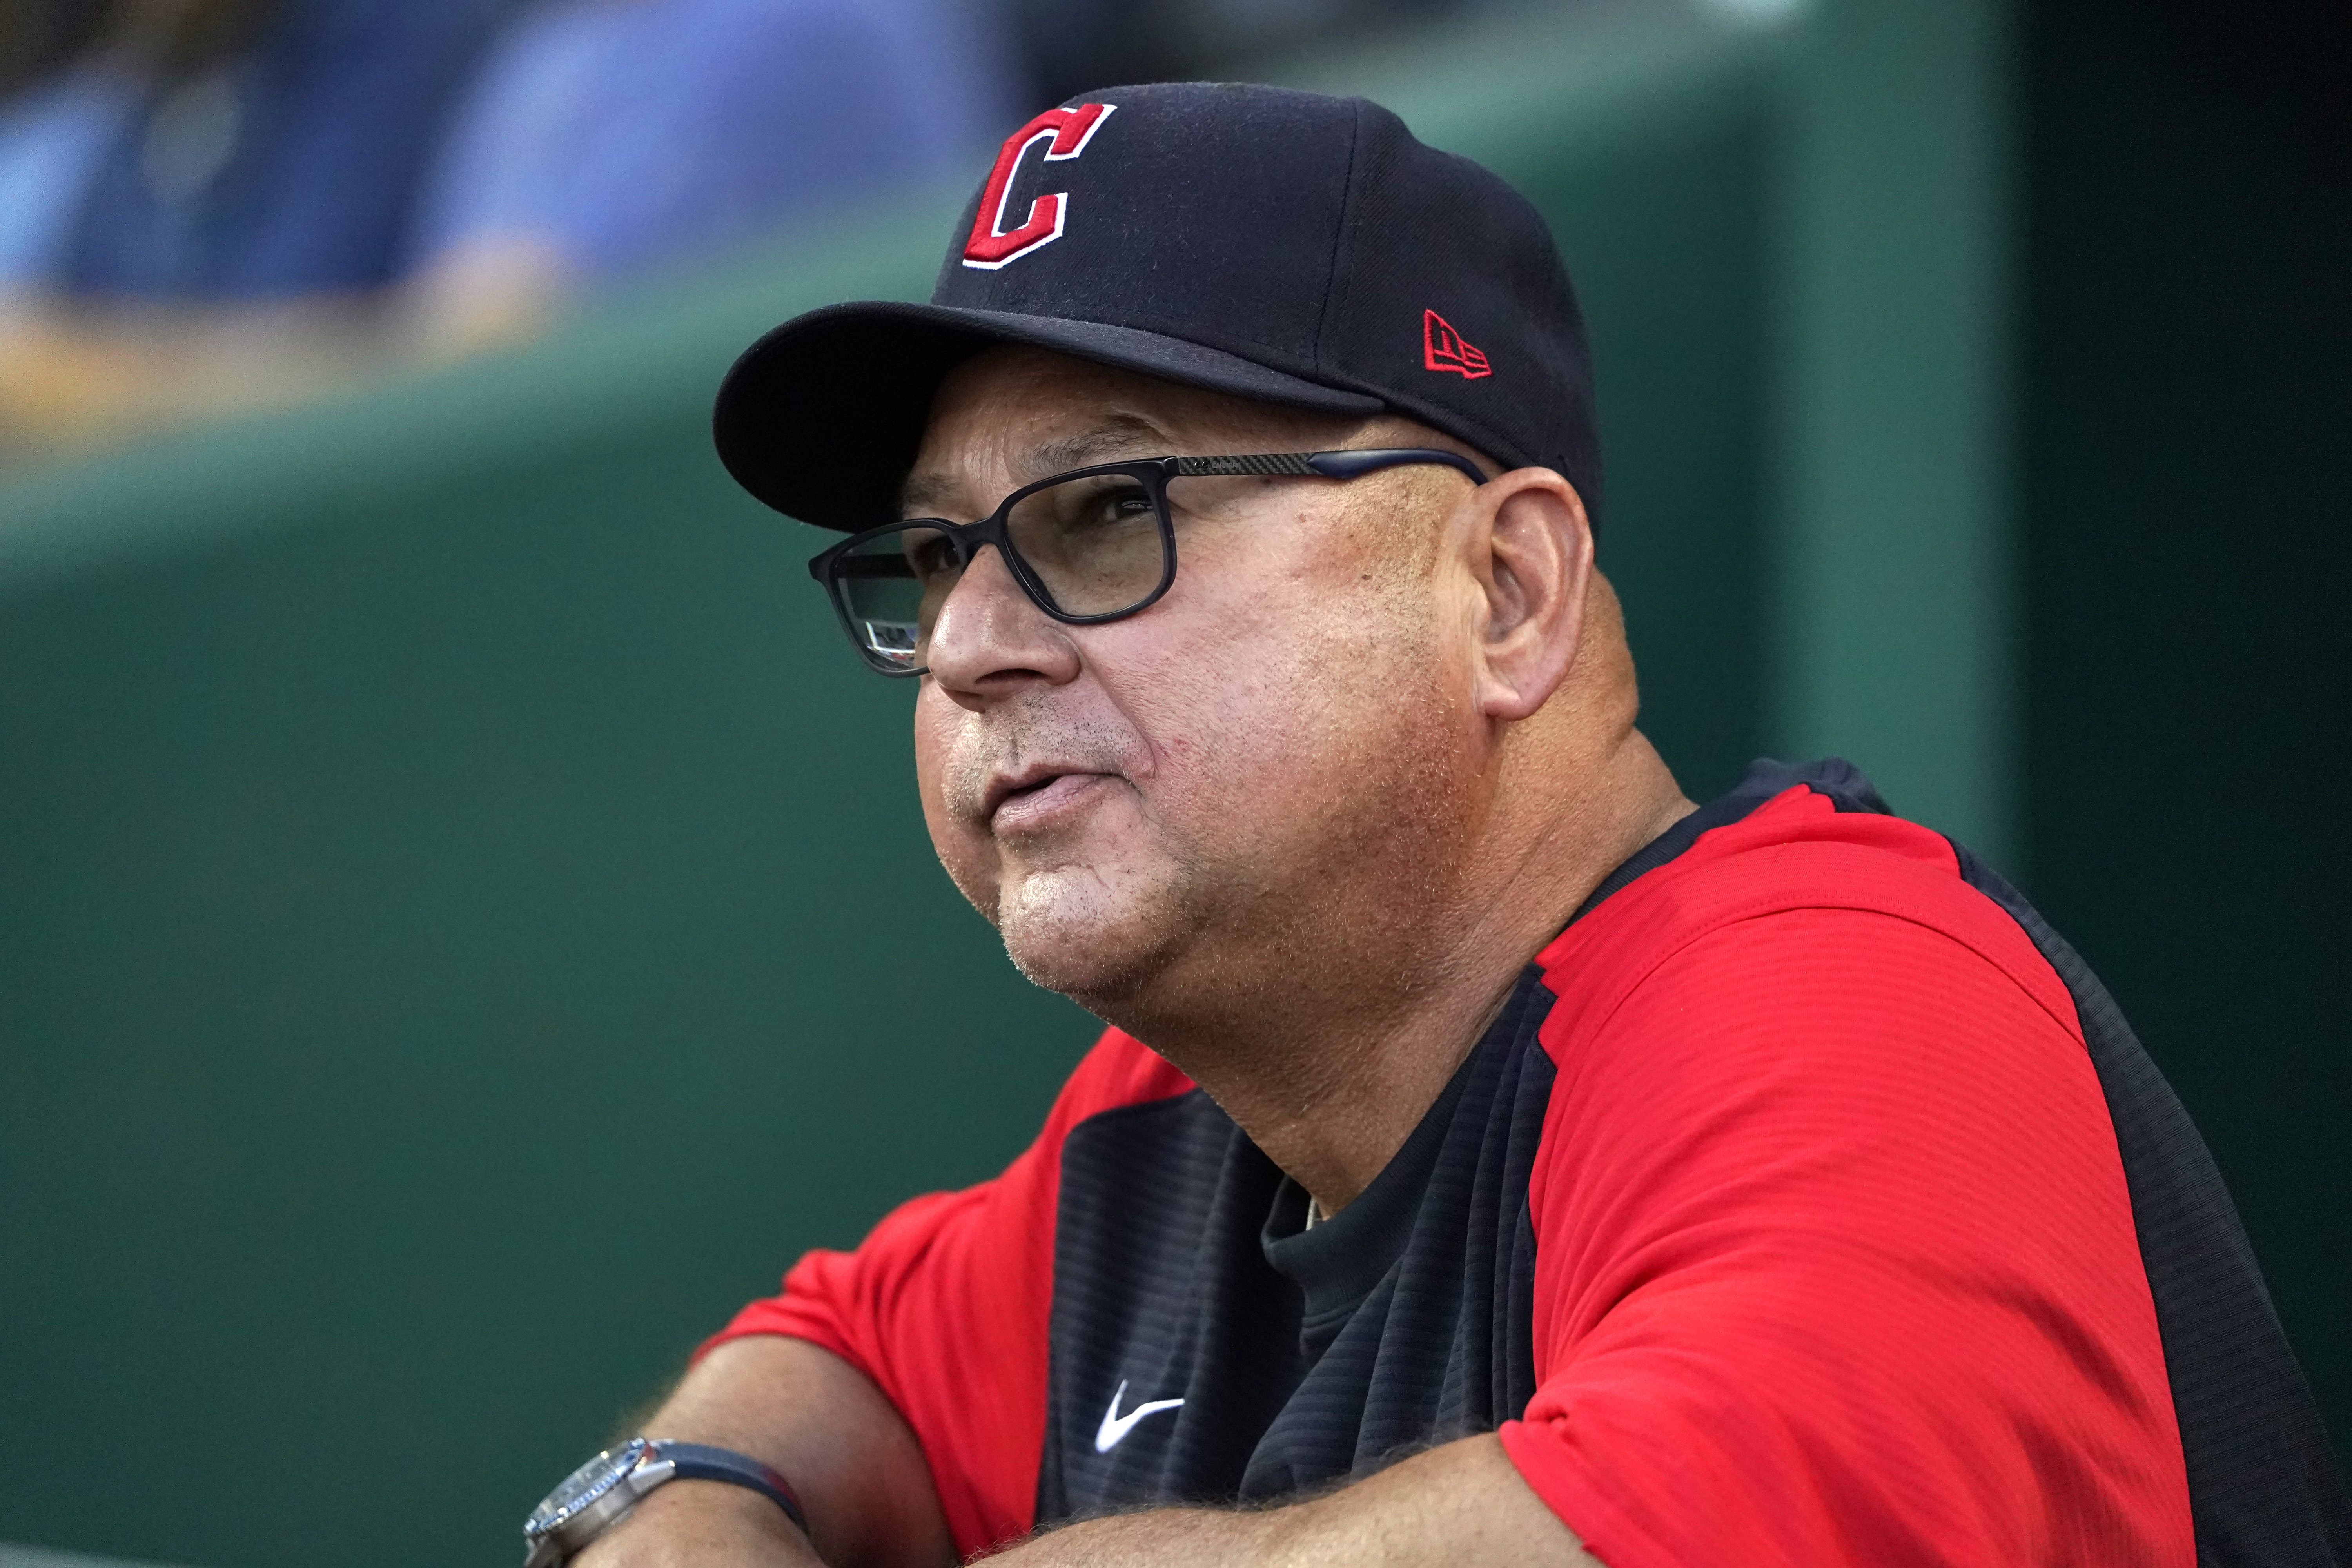 Francona's beloved scooter stolen, stripped as Cleveland's manager